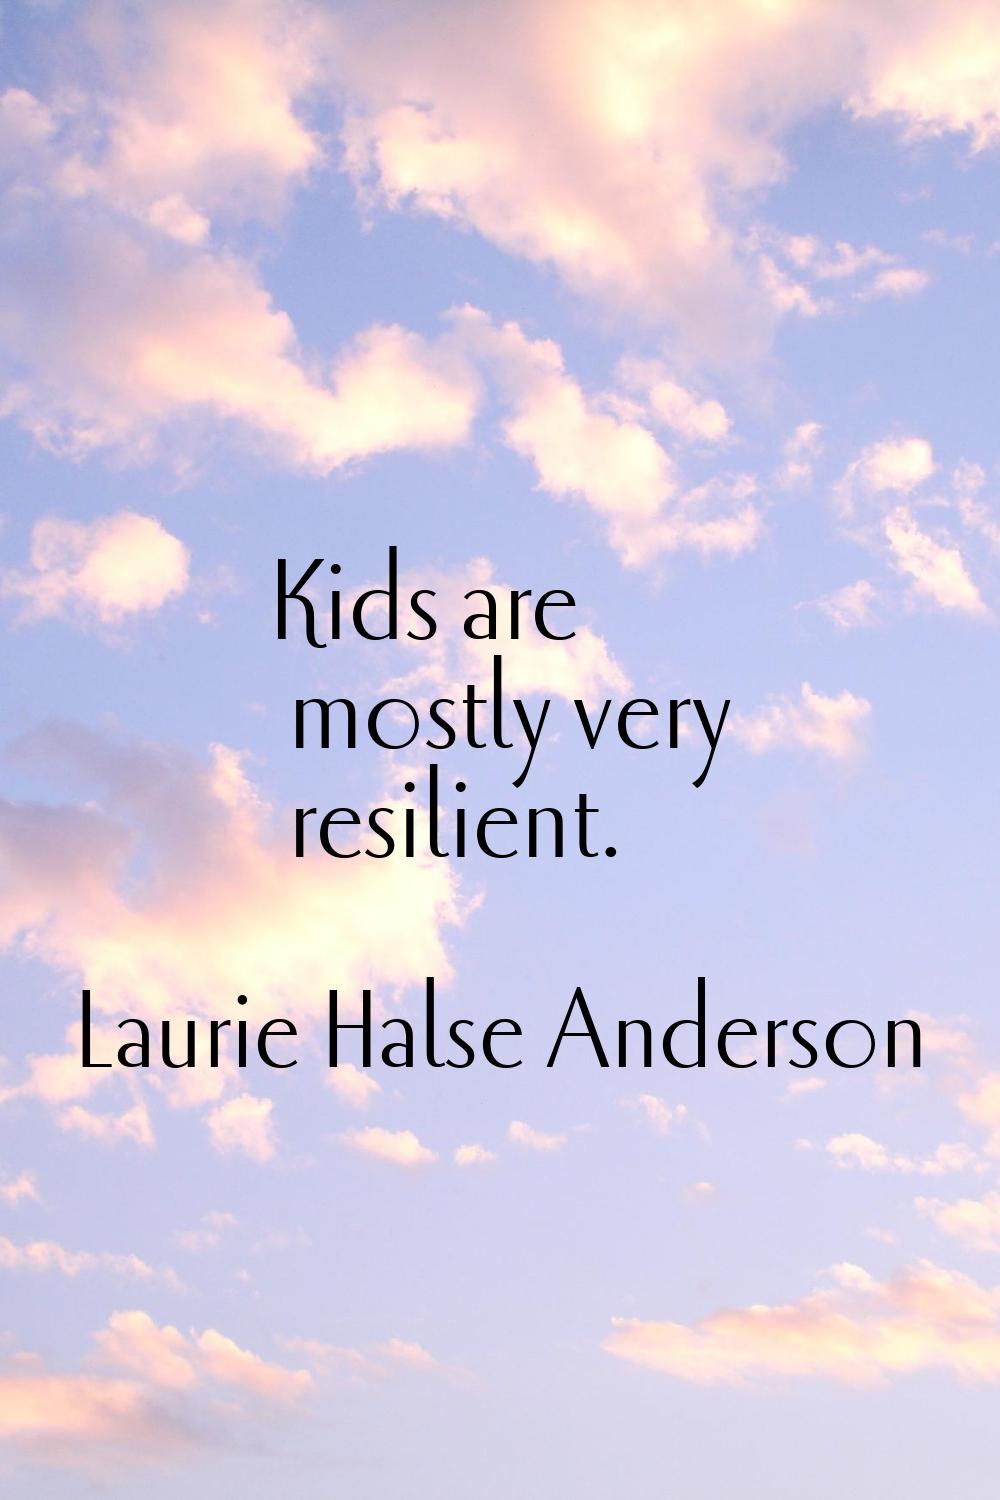 Kids are mostly very resilient.